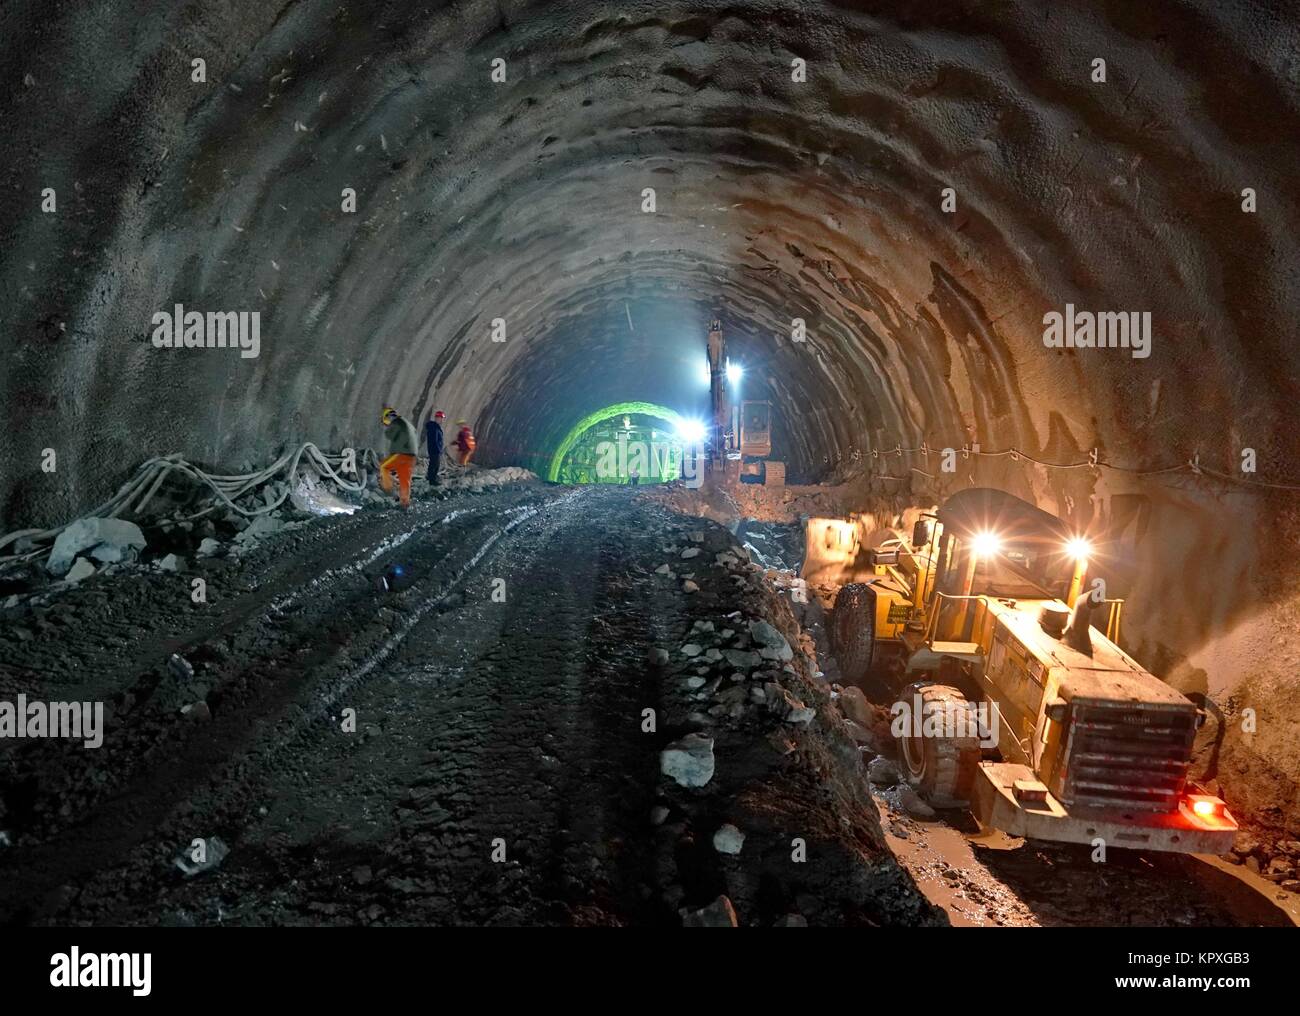 Shijiazhuang. 17th Dec, 2017. Photo taken on Dec. 17, 2017 shows the construction site of Zhengpantai tunnel of an extension line of the Beijing-Zhangjiakou high-speed railway in north China's Hebei Province. The 52-km extension of the Beijing-Zhangjiakou railway to Hebei's Chongli District, where most of the 2022 Olympic skiing events will be held, is expected to be completed by the end of 2019. Credit: Yang Shiyao/Xinhua/Alamy Live News Stock Photo